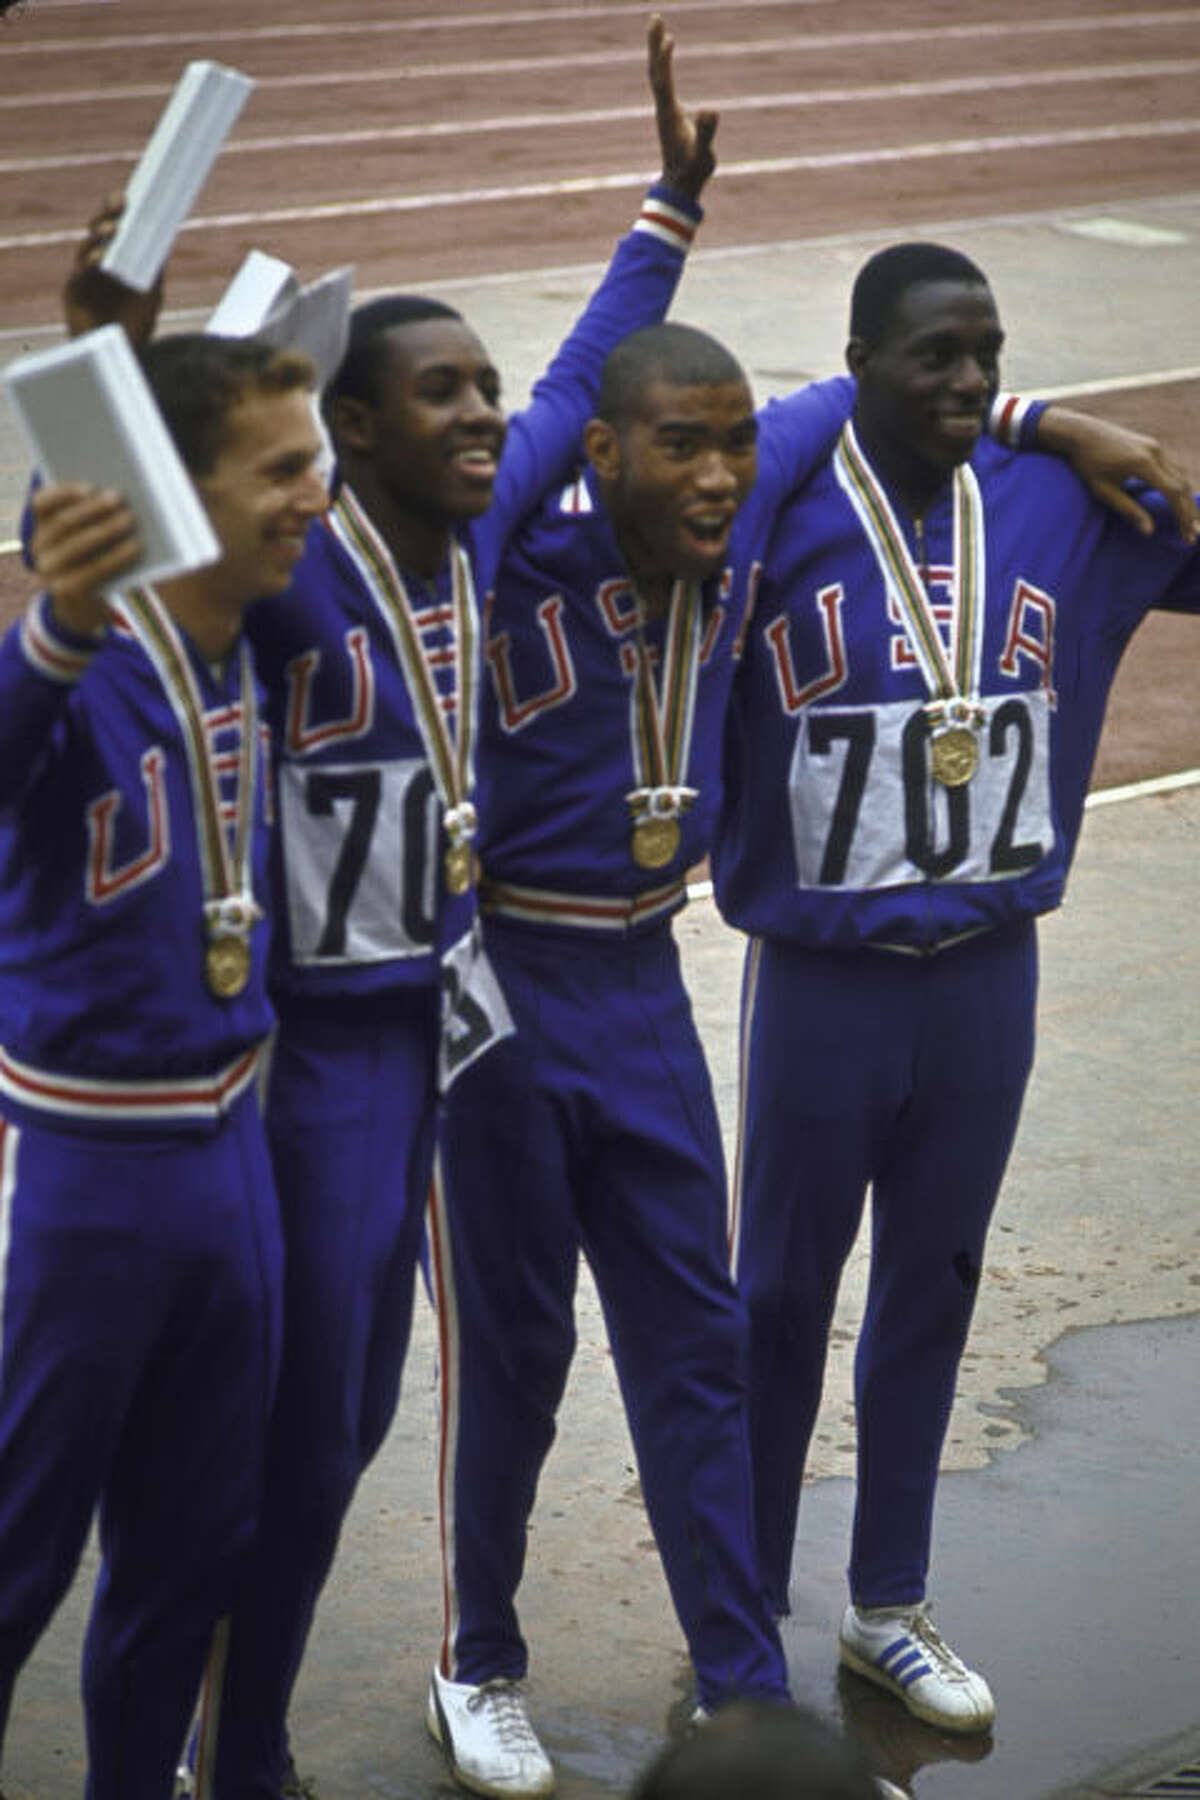 2) 1964: U.S. Track Team USA would totally put on these classic sweats today. It doesn't get anymore iconic than red, white, and blue (and gold.) The men's 4X100 meter relay team took first place that year in Tokyo.